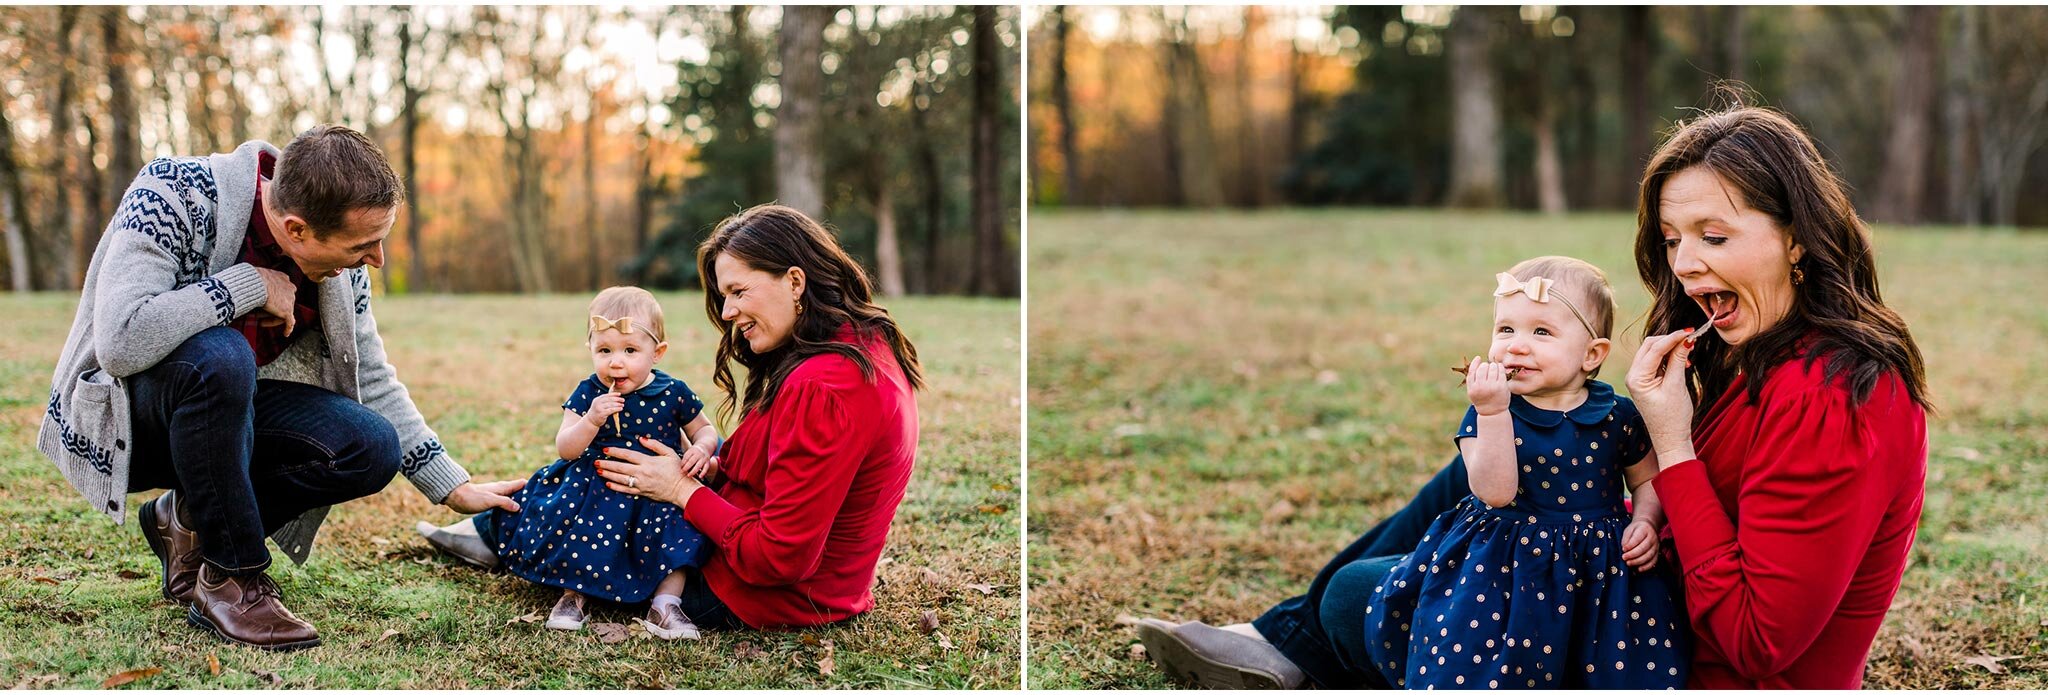 Durham Photographer | By G. Lin Photography | Candid portrait of family sitting on grass and laughing | West Point on Eno River